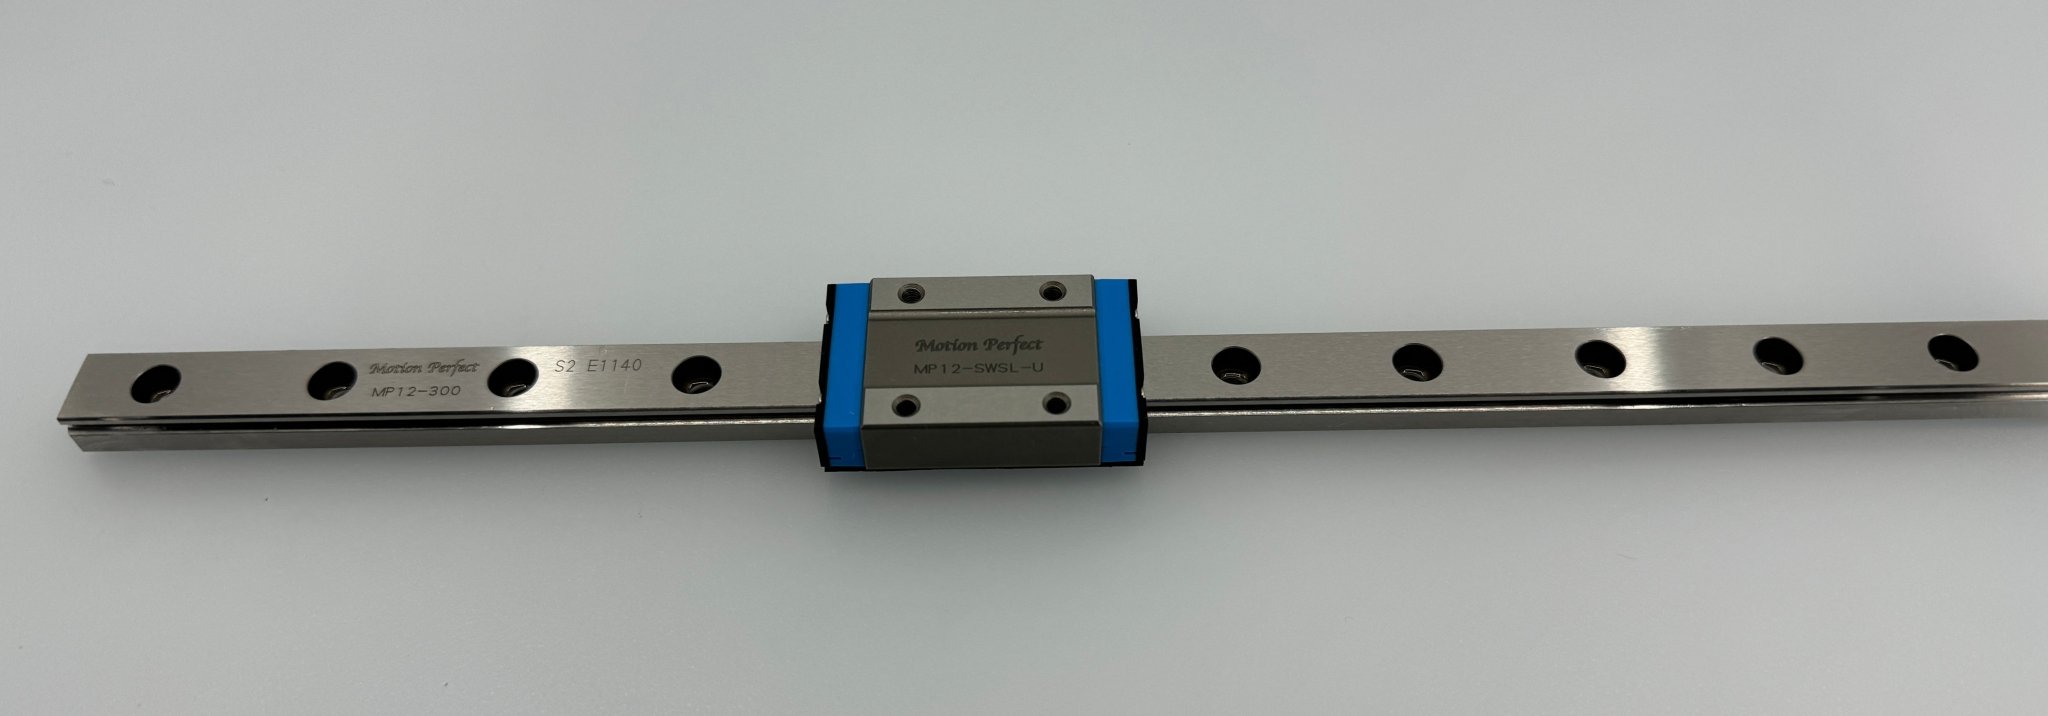 Motion Perfect Linear Rail (Guideway) and Carriage (Car) MGN12 - West3D 3D Printing Supplies - Motion Perfect